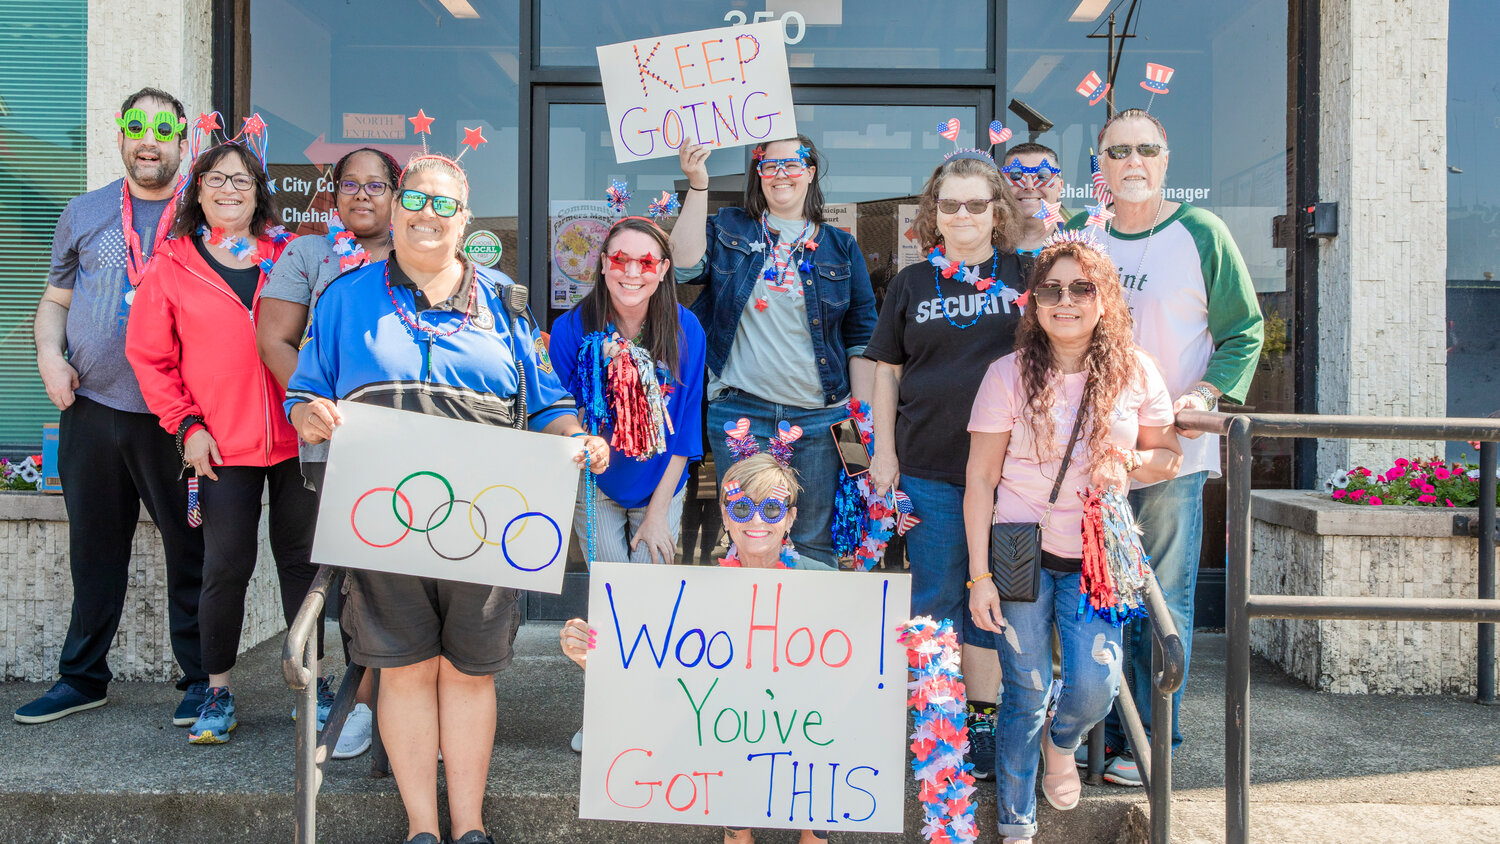 Supporters pose for a photo outside Chehalis City Hall before cheering on participants in the Lewis County Special Olympics Law Enforcement Torch Run on Friday, June 2.